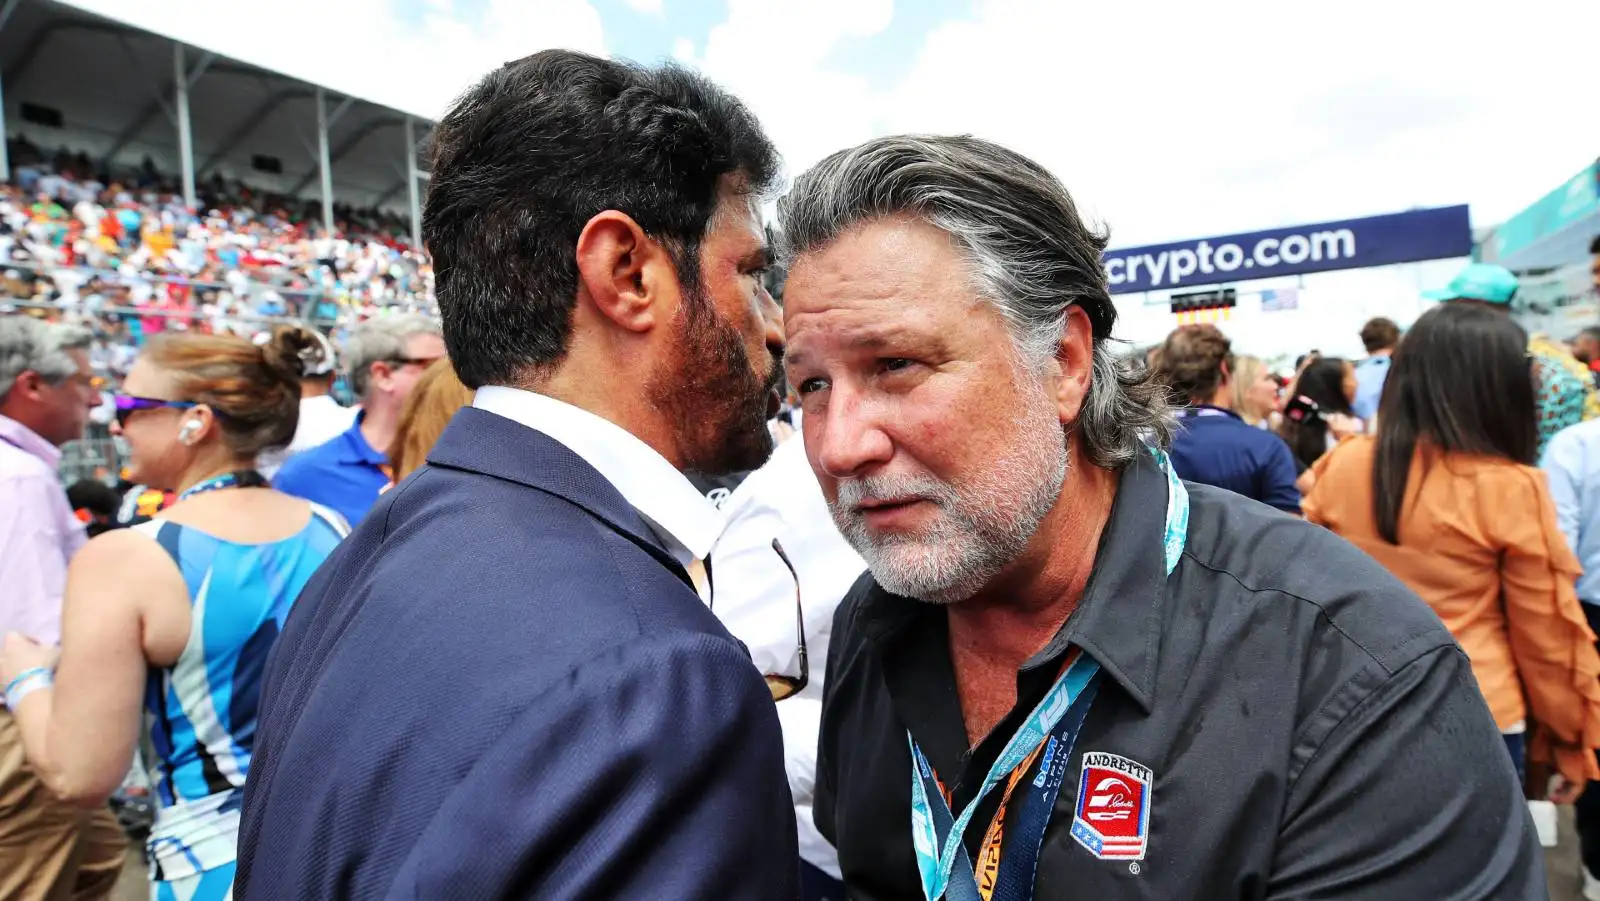 Michael Andretti listening to FIA president Mohammed Ben Sulayem. Miami May 2022.